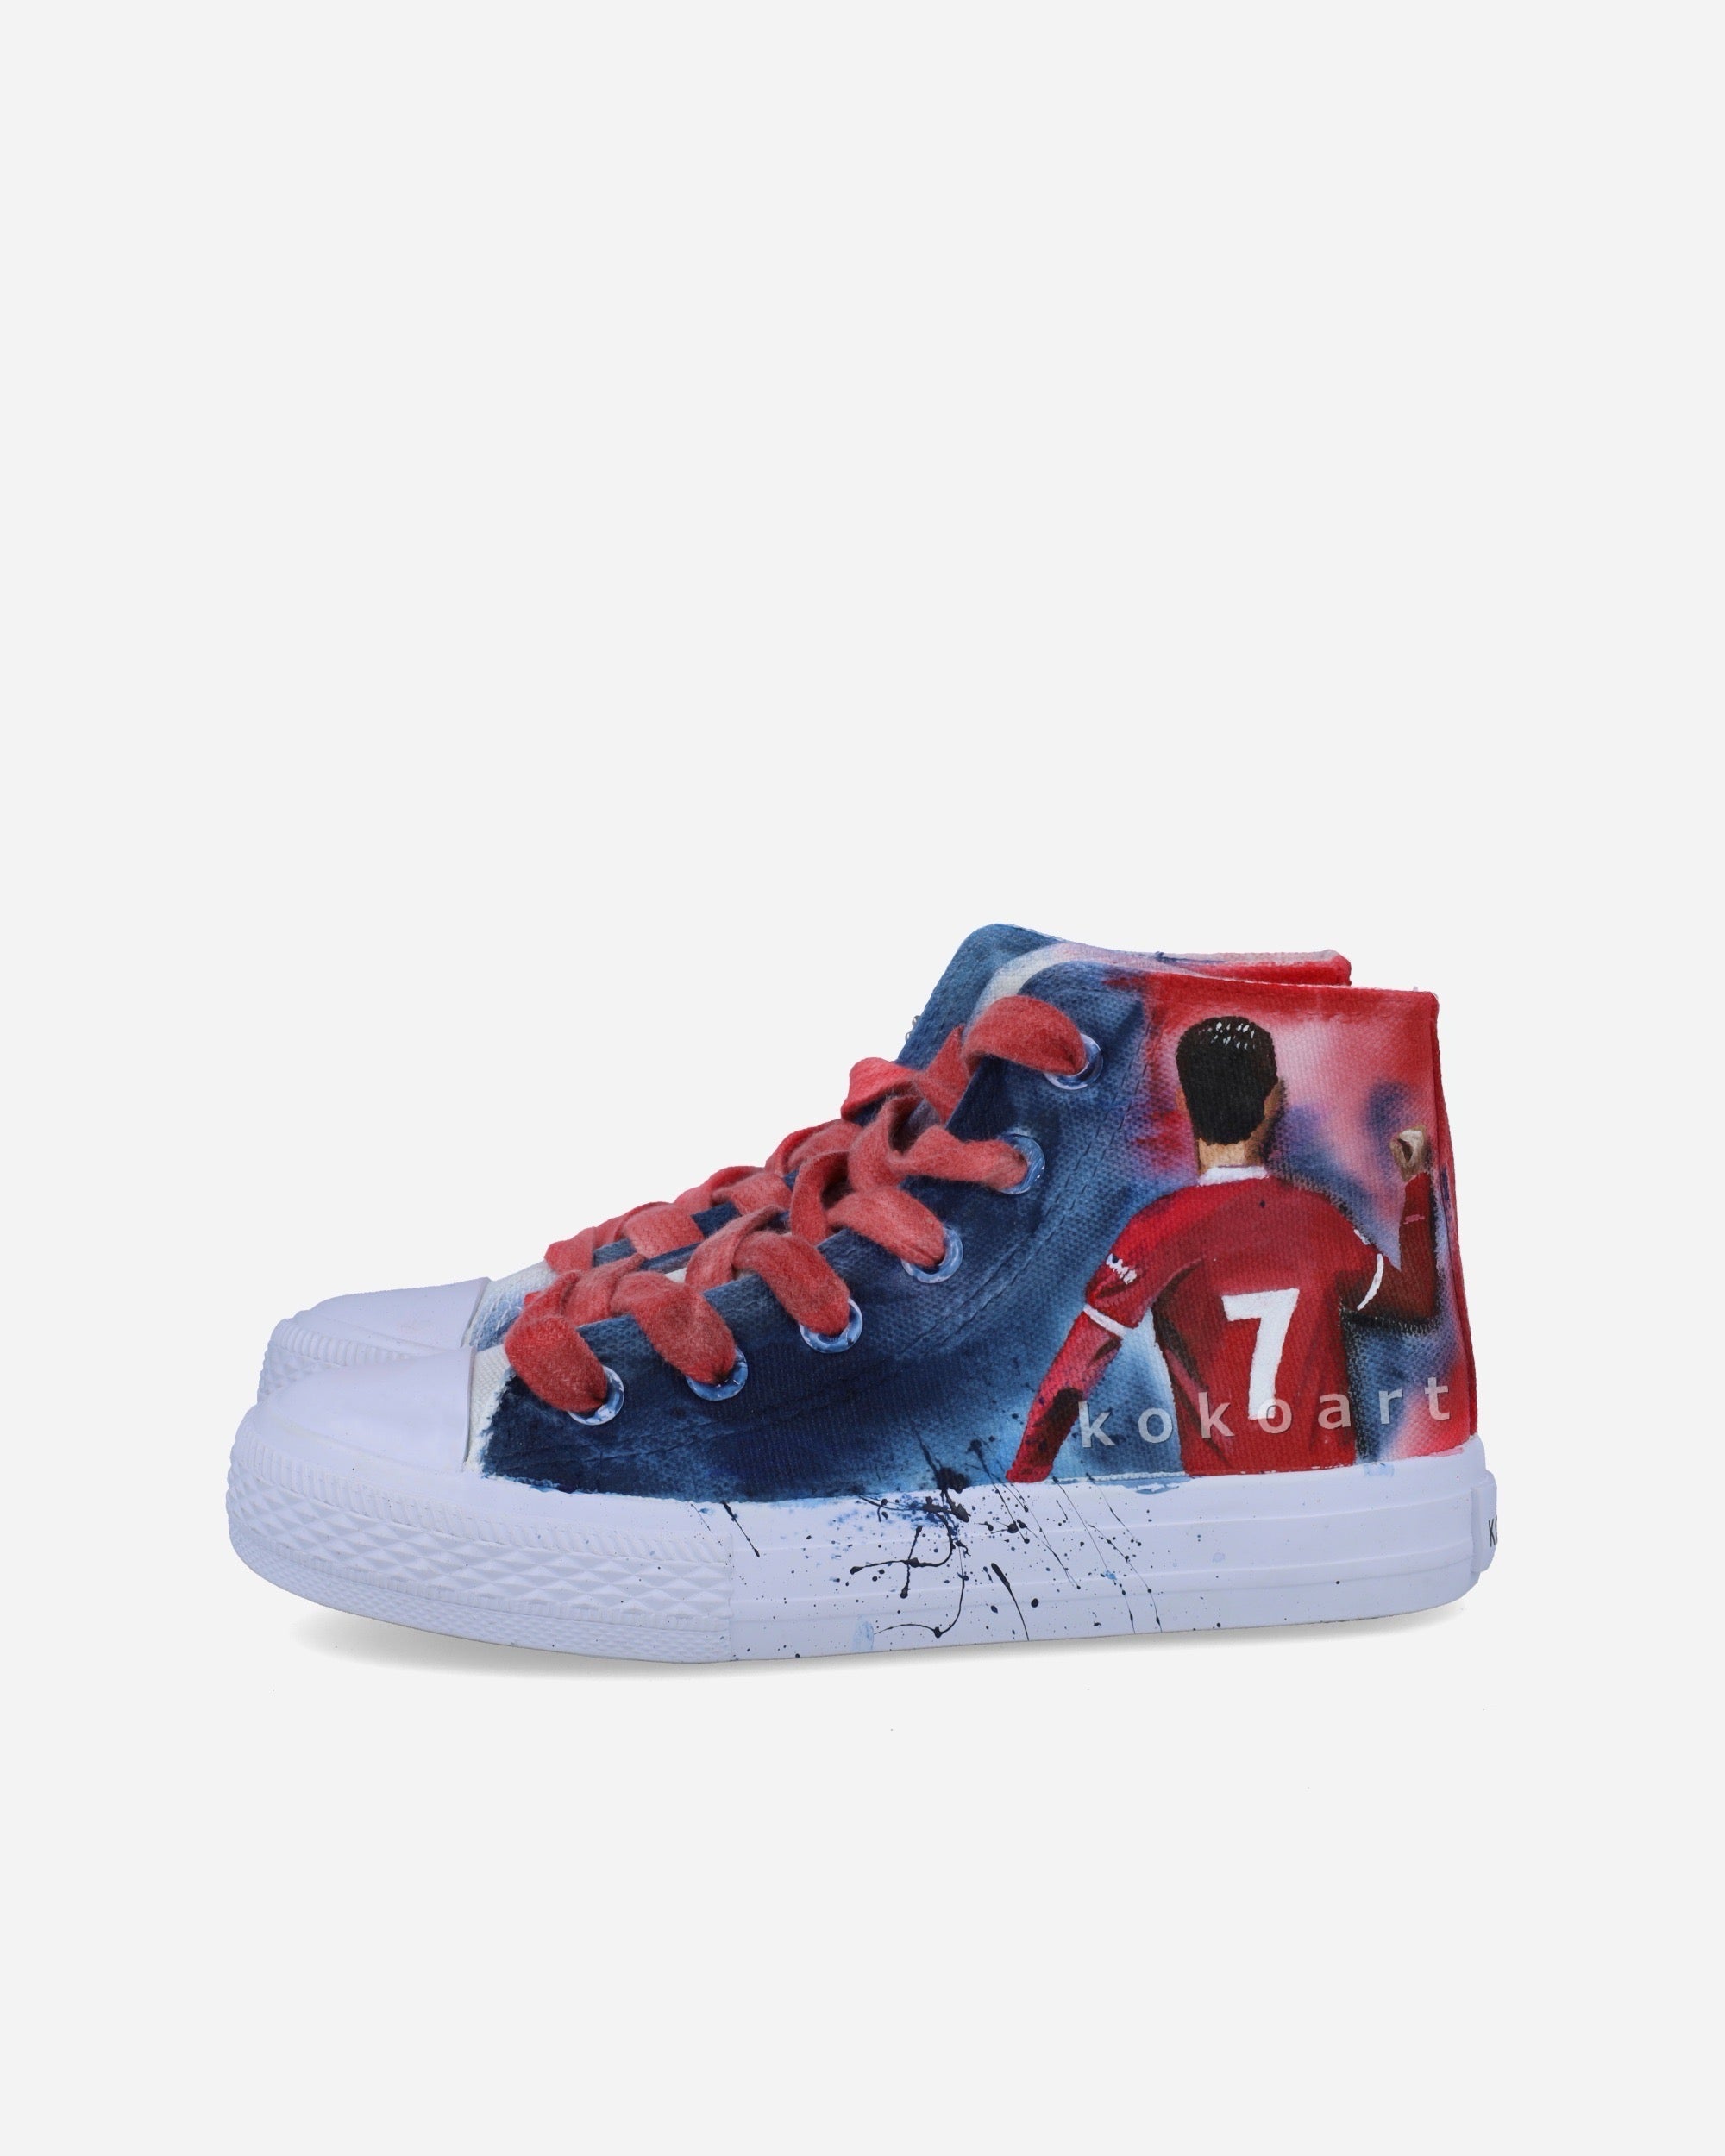 Football Player Hand Painted Shoes